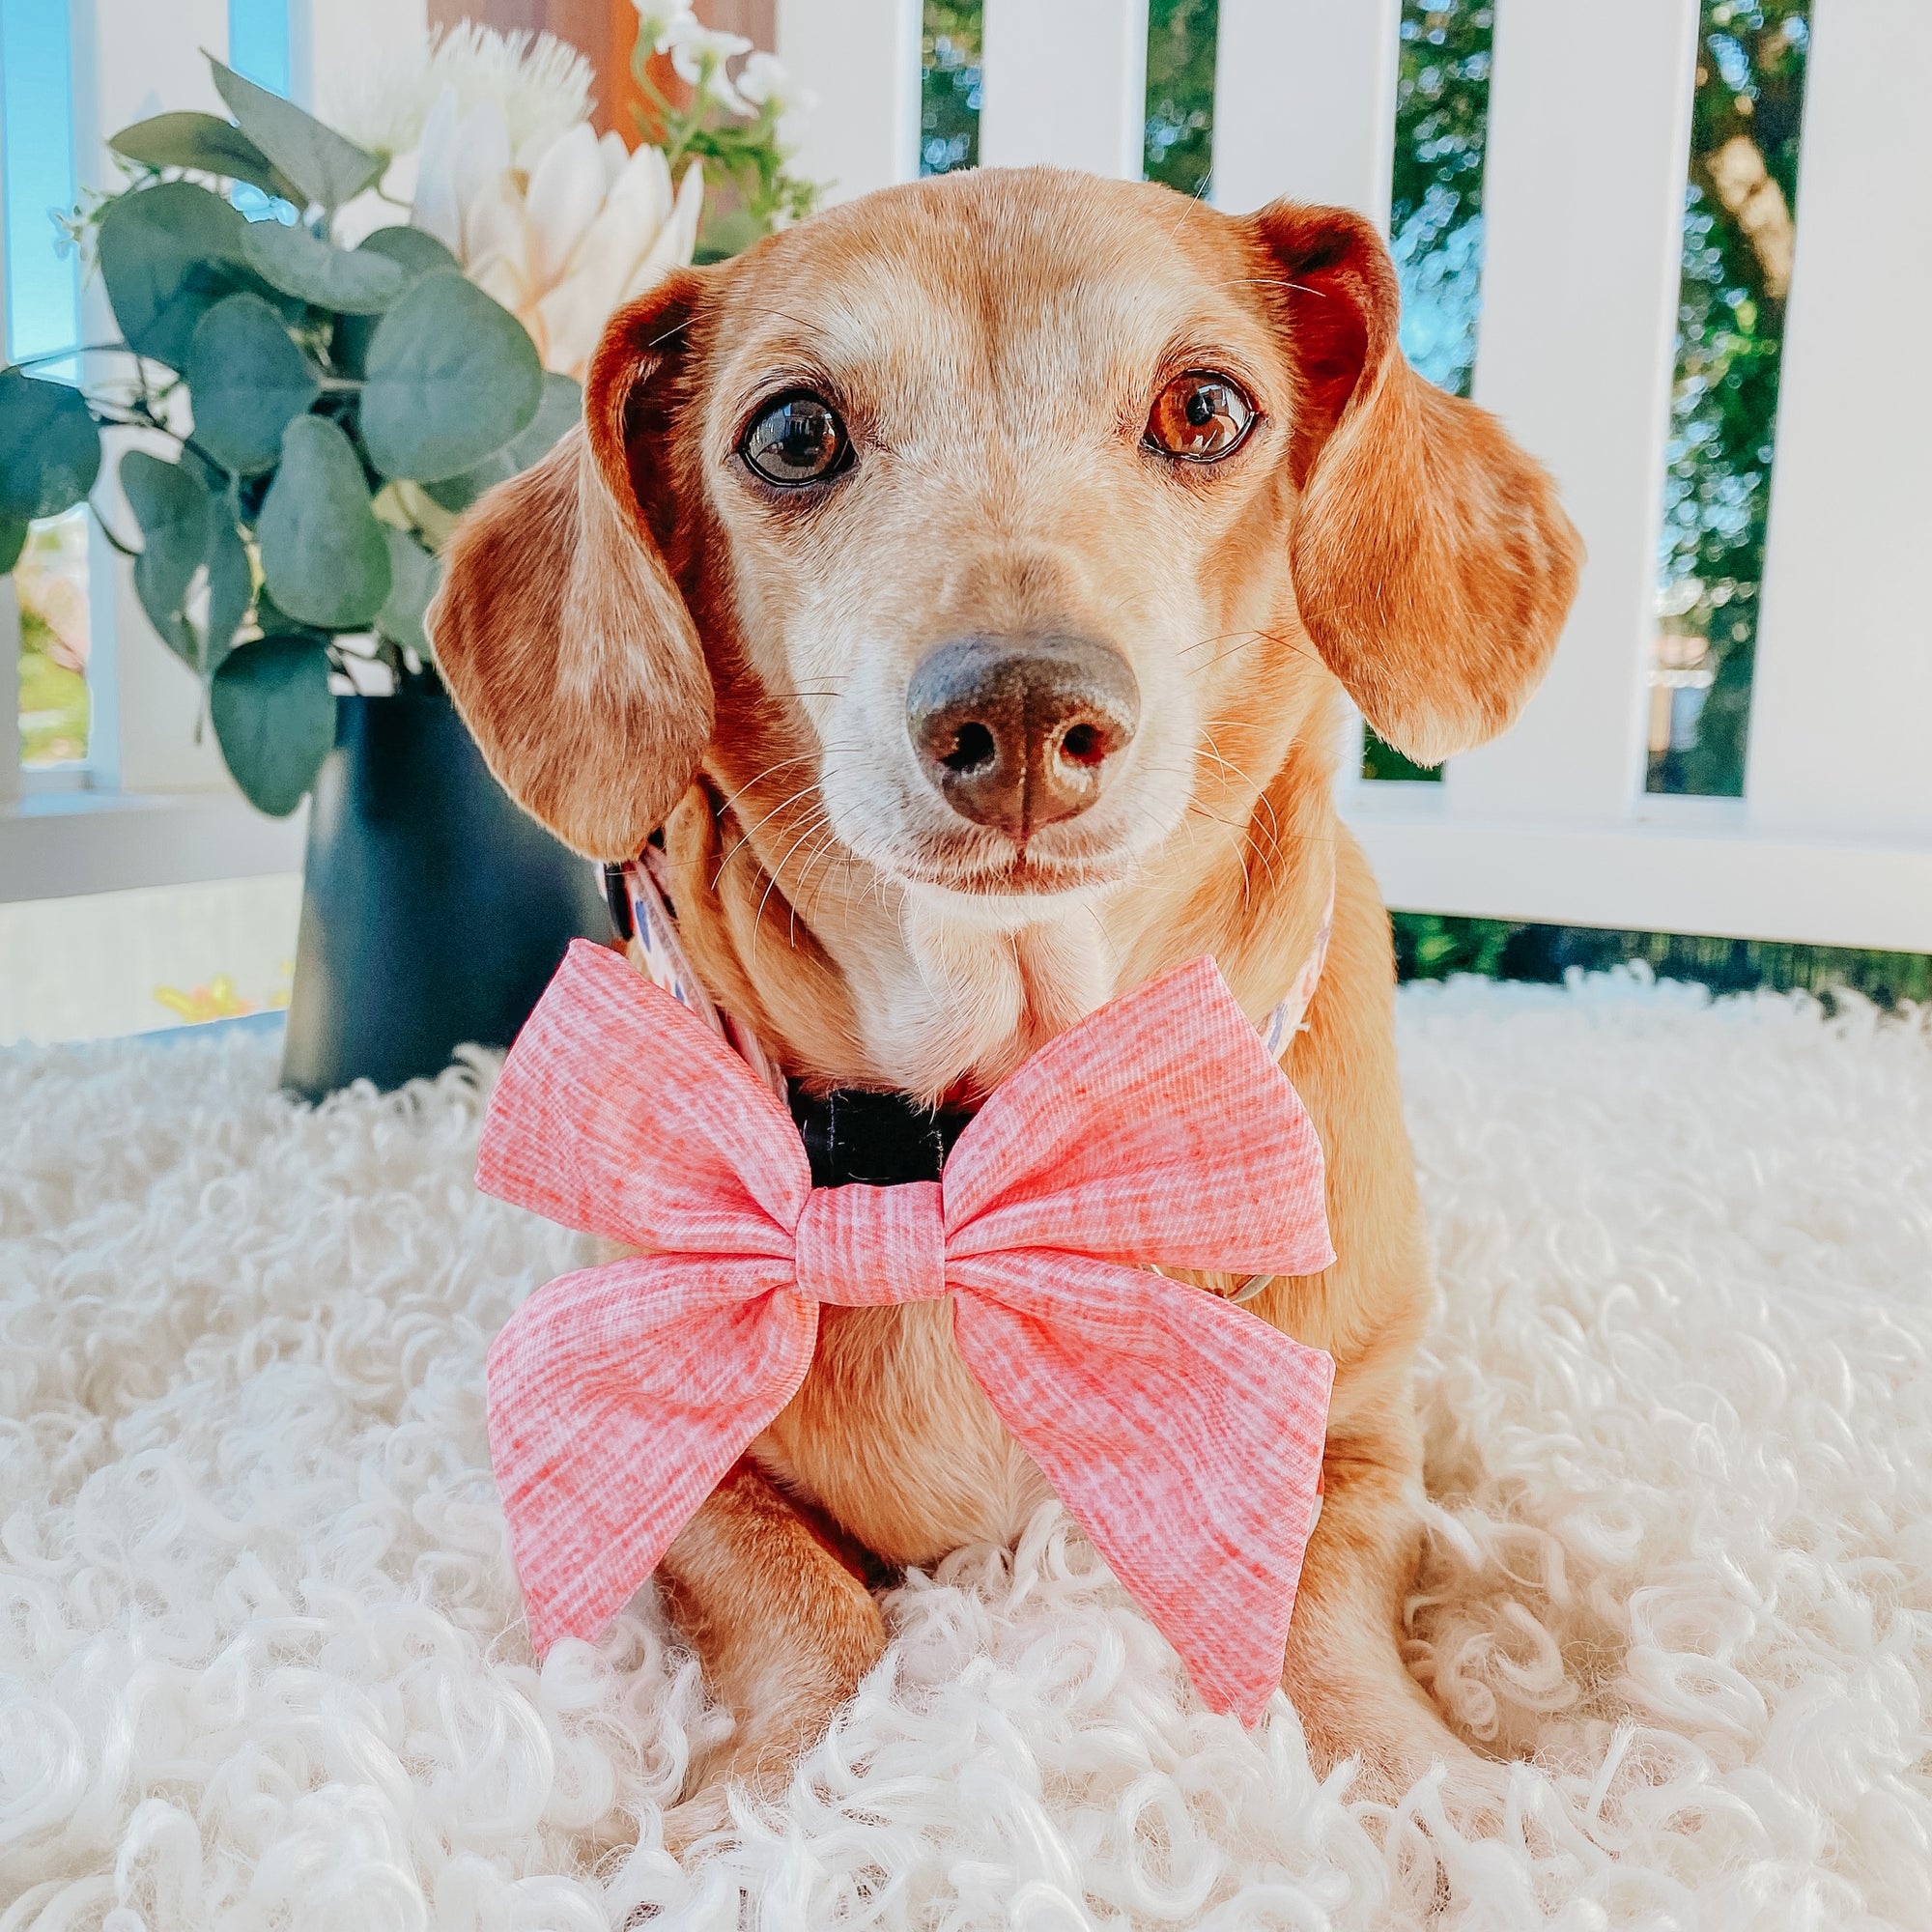 INFLUENCER_CONTENT | @SHELBY.THE.DOXIE